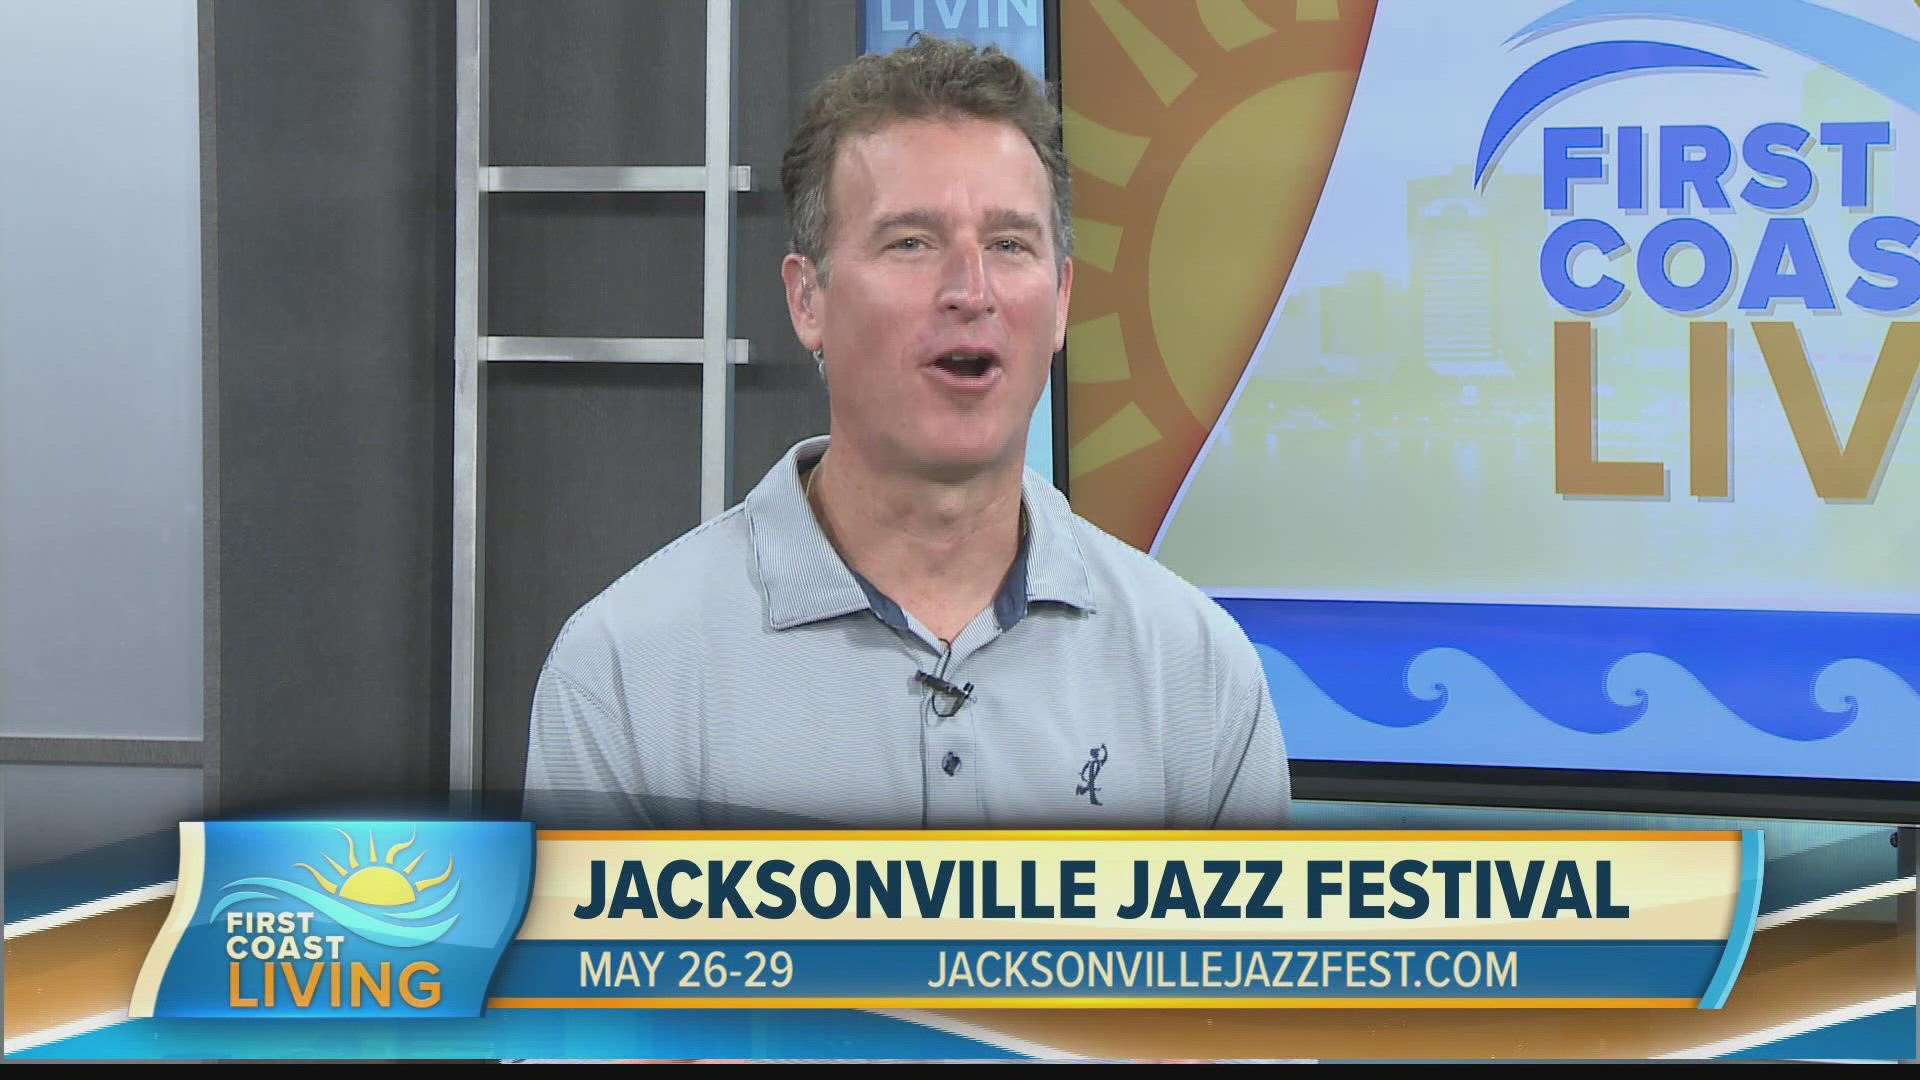 Paola Lorenzo, the City of Jacksonville Media Specialist gets you ready to put on your dance shoes and catch a cool vibe! The Jacksonville Jazz Fest is May 26-29th.